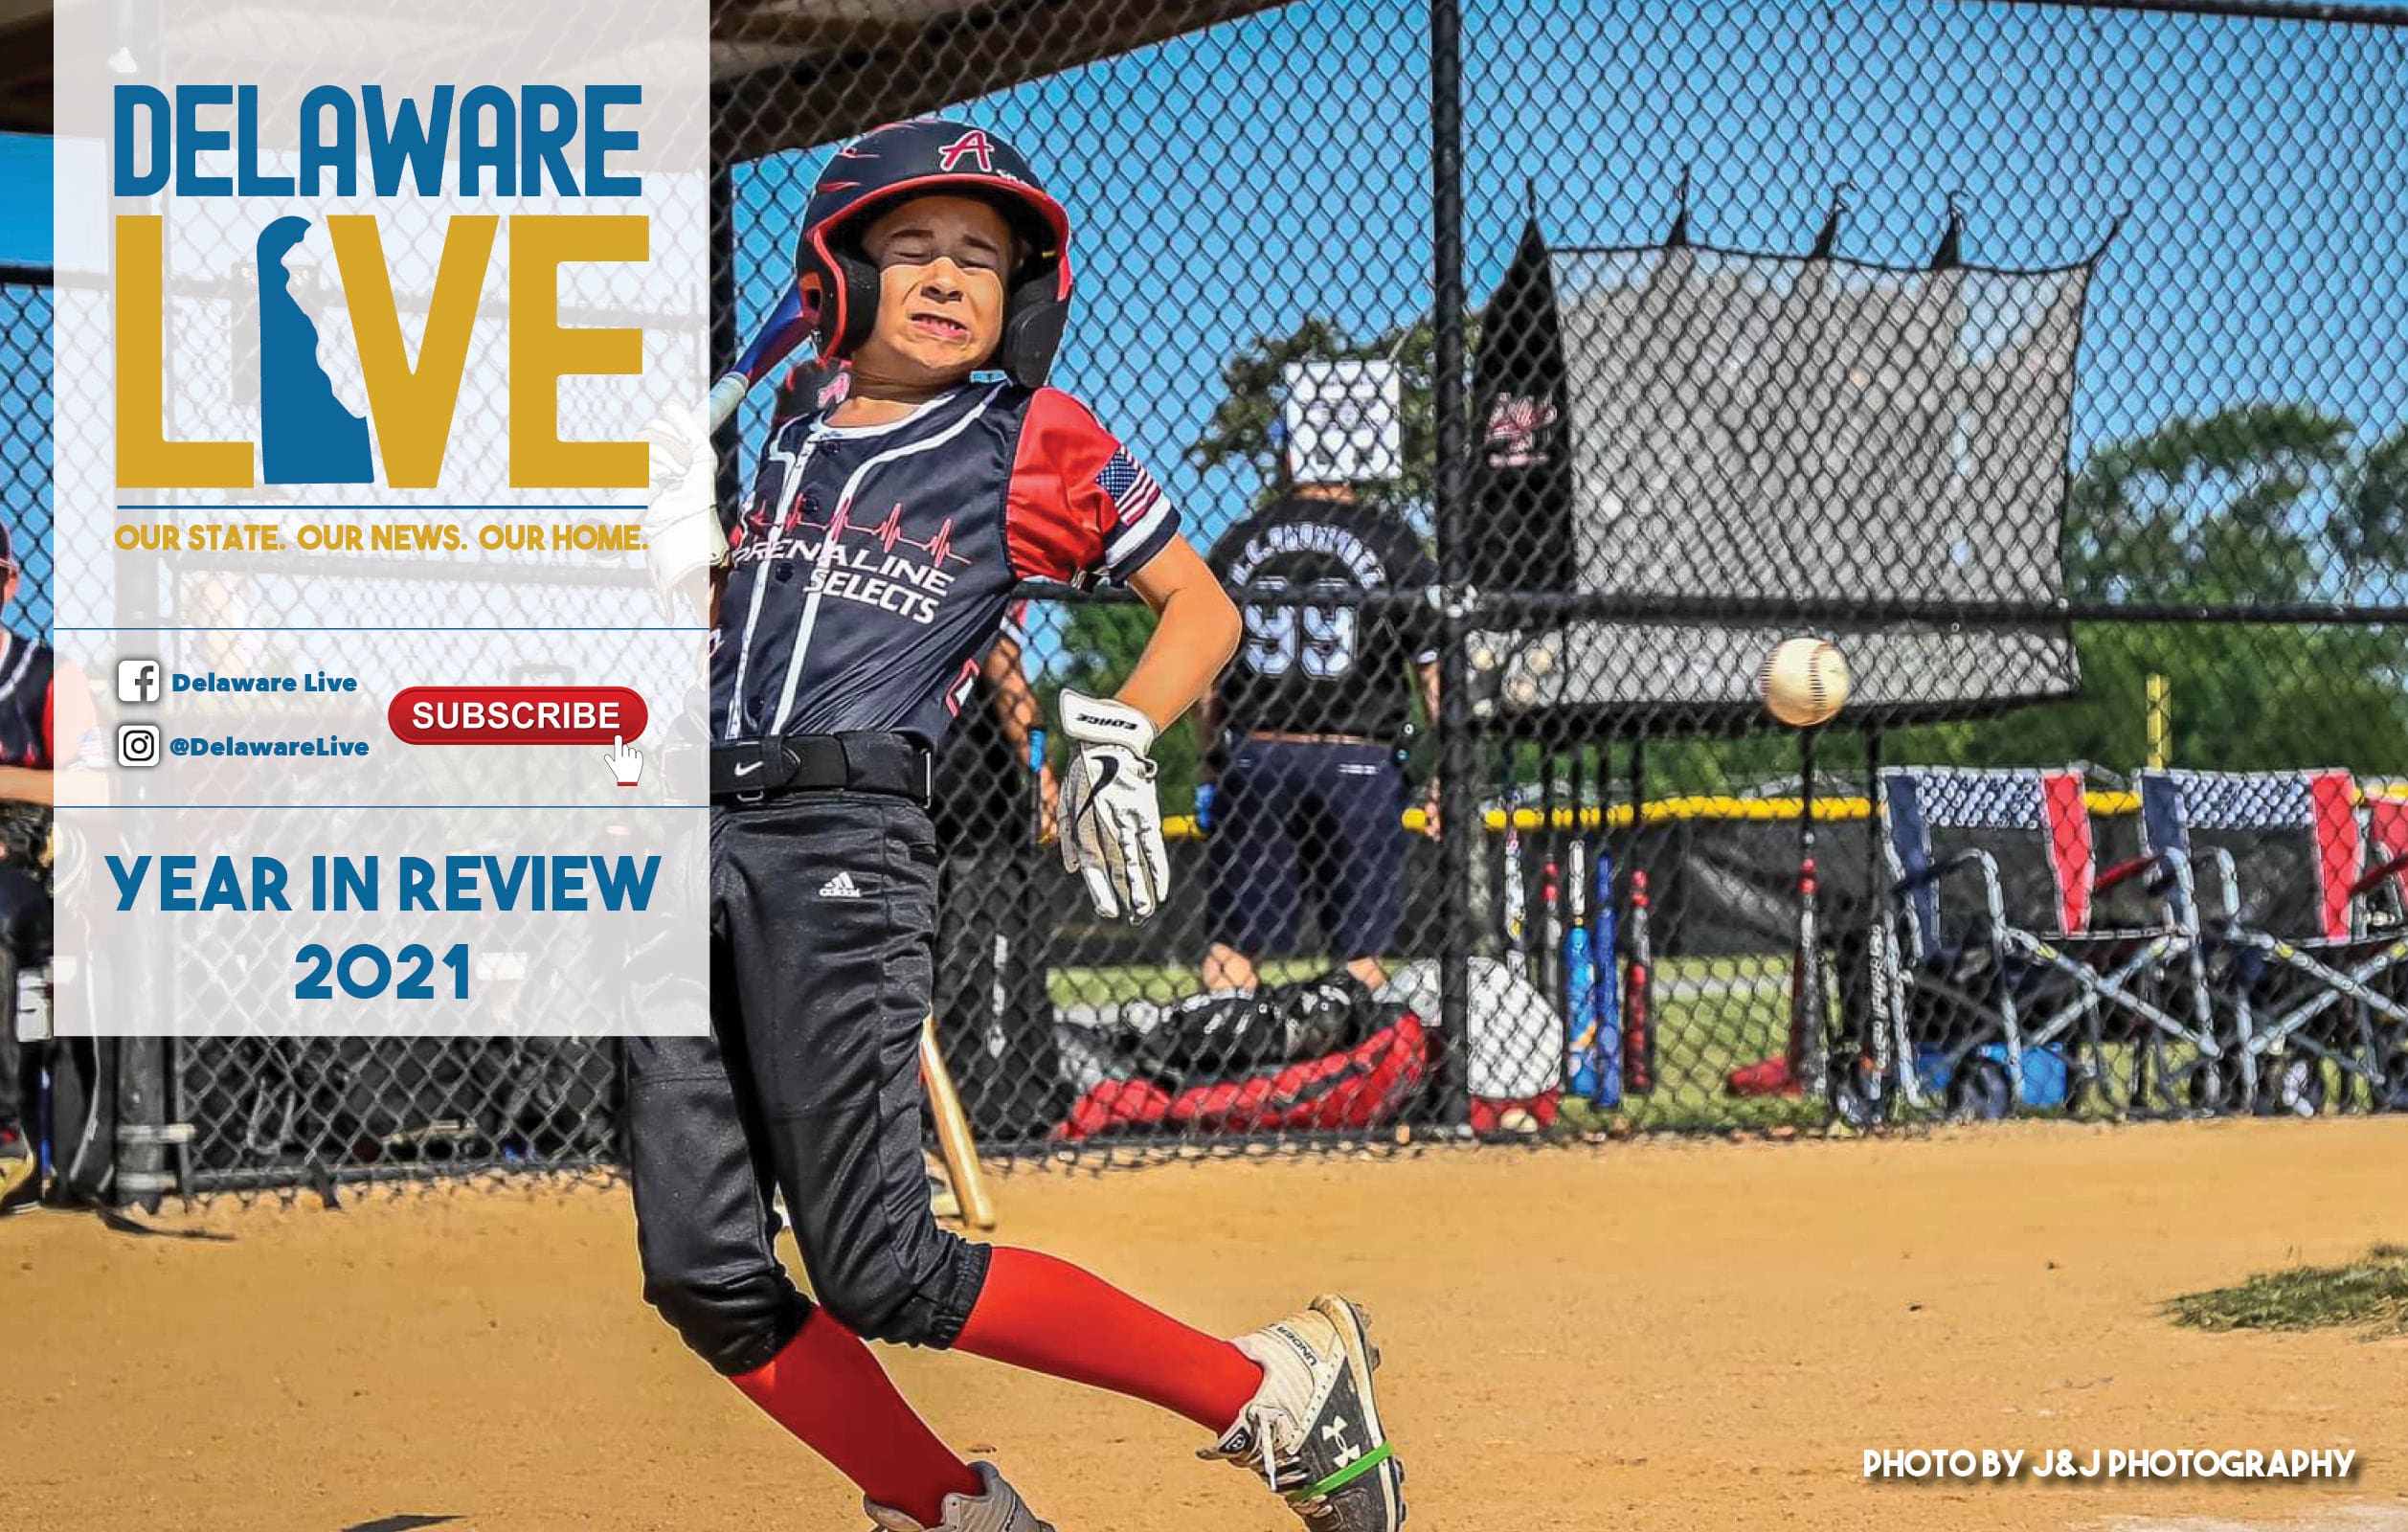 Featured image for “Delaware LIVE Weekly Review – YEAR IN REVIEW 2021”